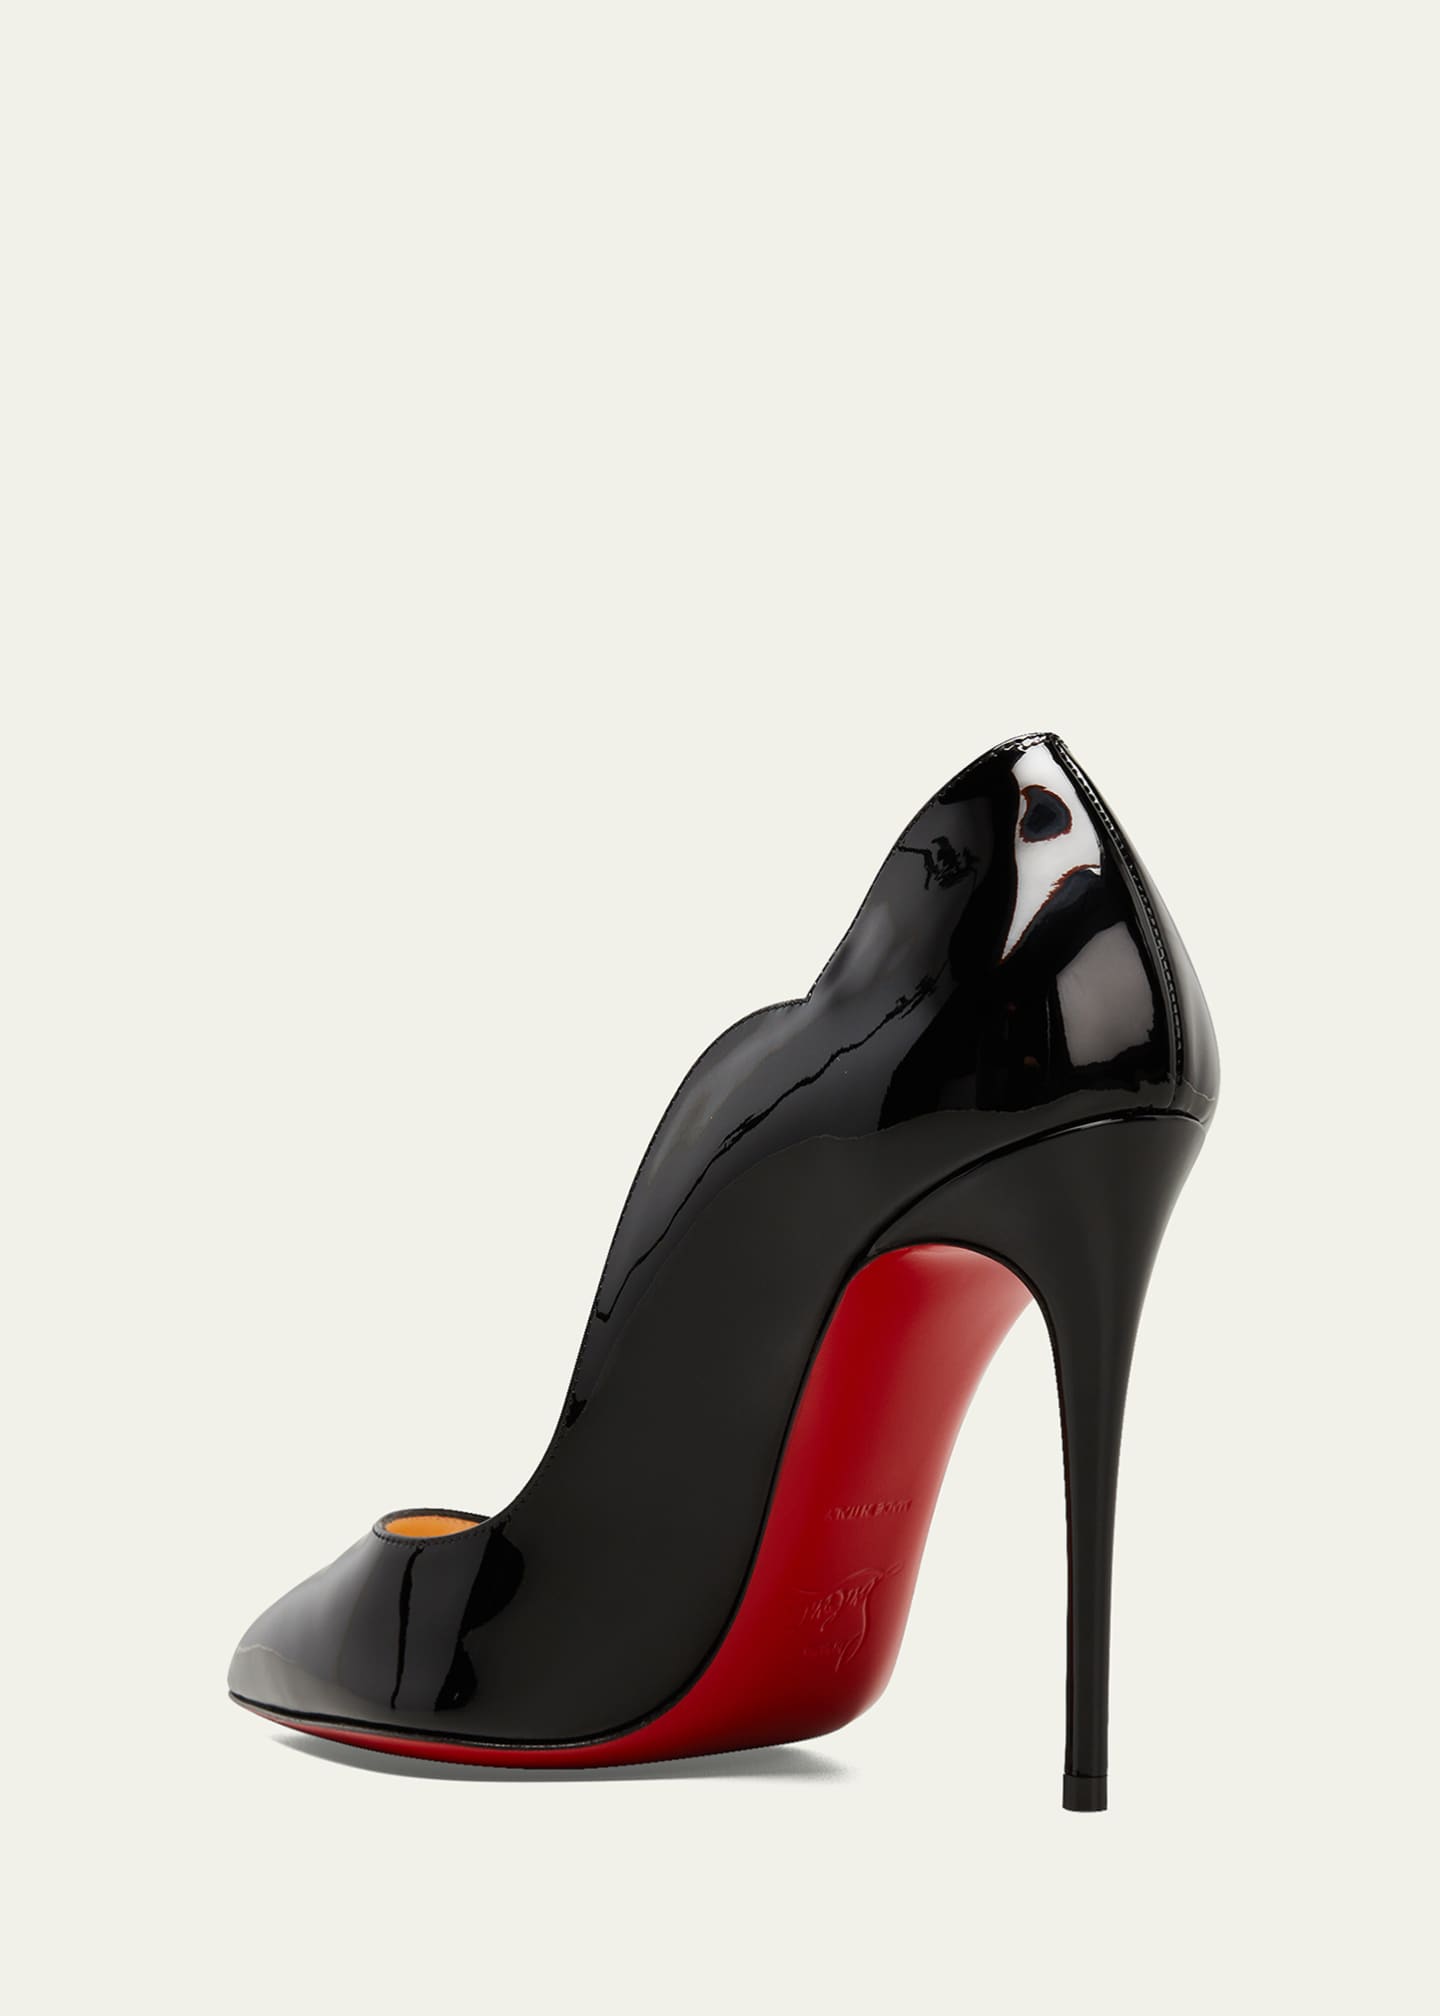 Hot Chick 100 Patent Leather Pumps in Black - Christian Louboutin